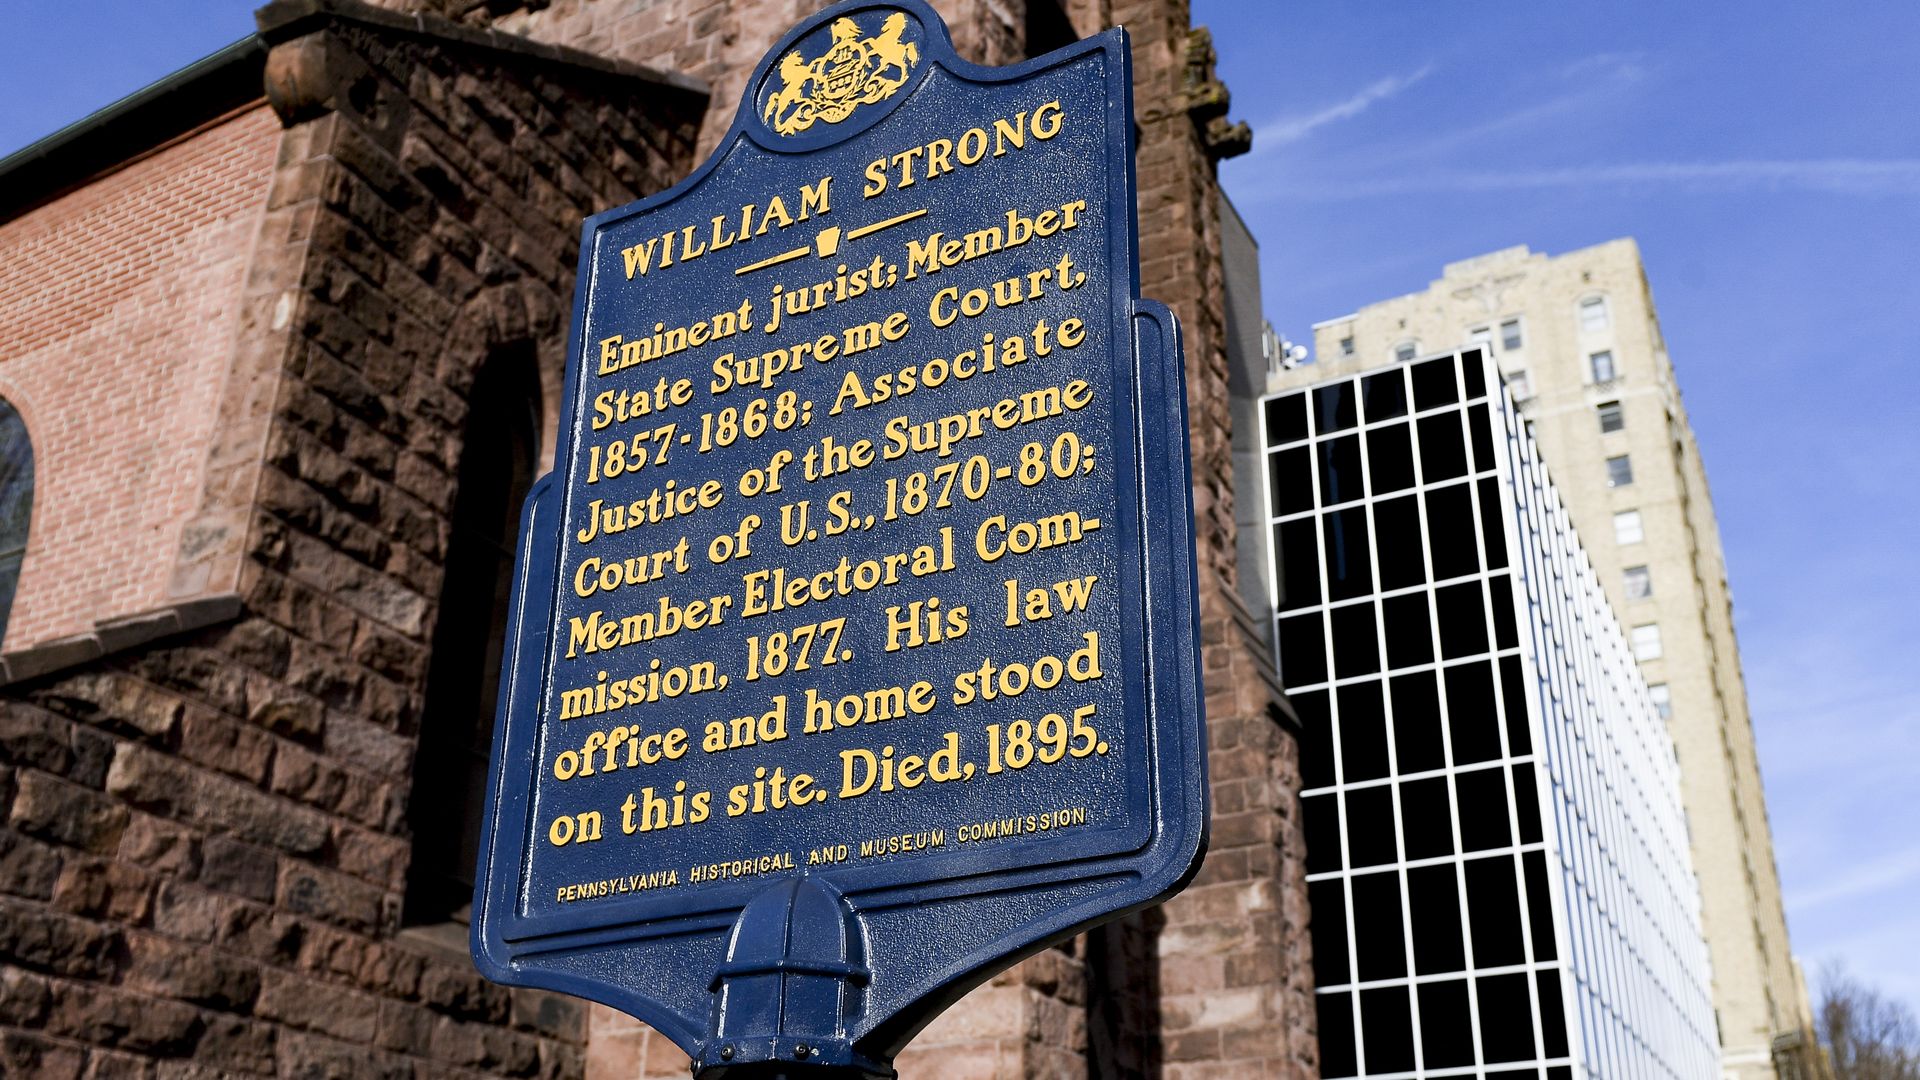 This blue-and-gold marker honoring William Strong is among thousands honoring Pennsylvania's rich history.